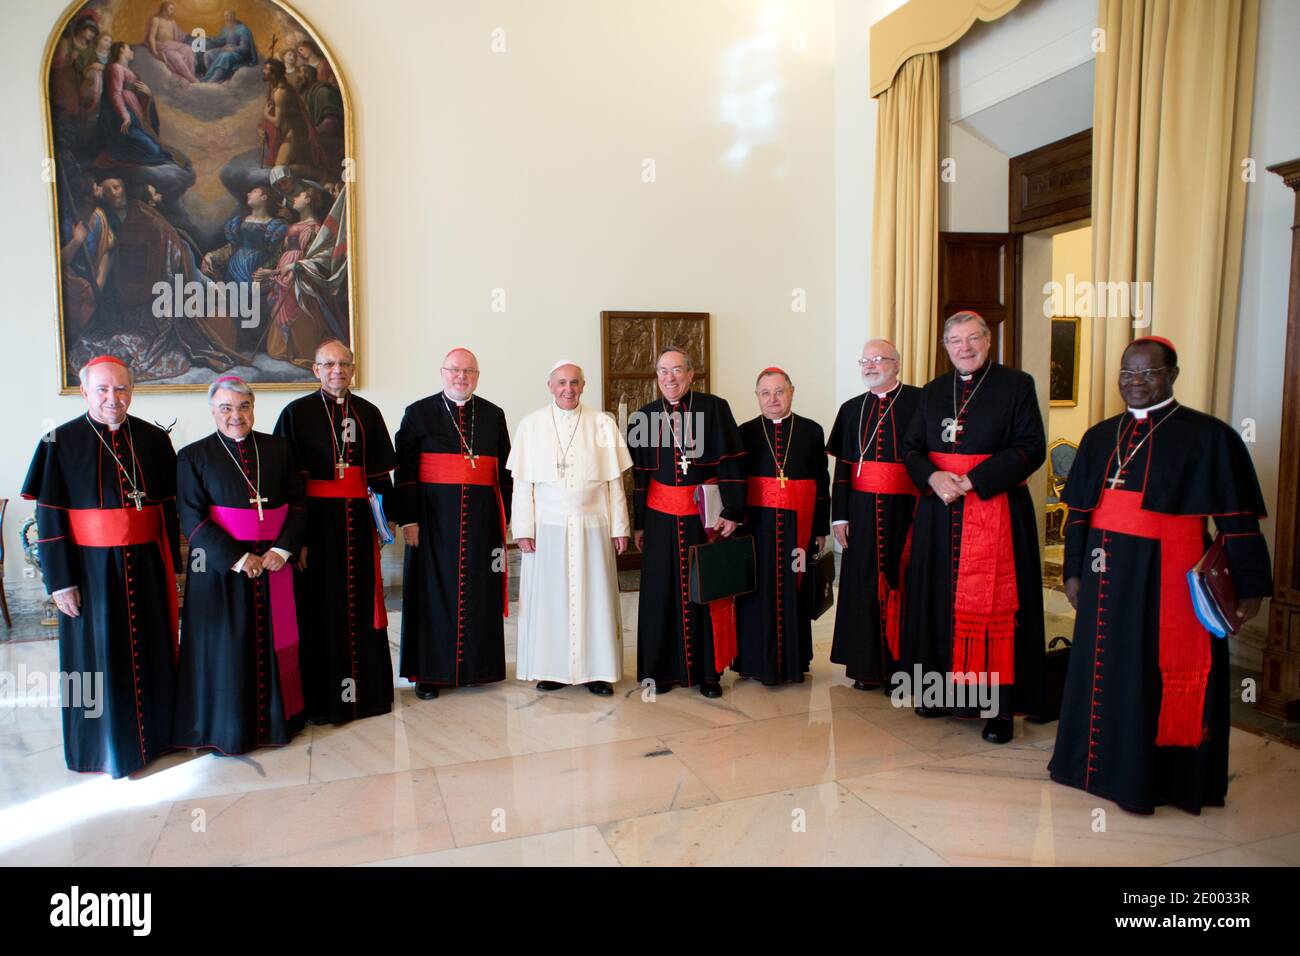 File photo - Pope Francis poses with cardinals during a meeting at the Vatican on October 1, 2013 for a first round of talks on reforming the Catholic Church. Eight cardinals began closed-door meetings with Pope Francis on to help him reform the Vatican's troubled administration, the Curia, and map out possible changes in the worldwide Church. Left to right : Fancisco Javier Errazuriz Ossa, Marcello Semeraro (secretary), Oswald Gracias, Reinhard Marx, pope Francis, Andres Rodriguez Maradiaga, Giuseppe Bertello, Sean Patrick O'Malley, George Pell, Laurent Monsengwo Pasinya. The Vatican treasure Stock Photo